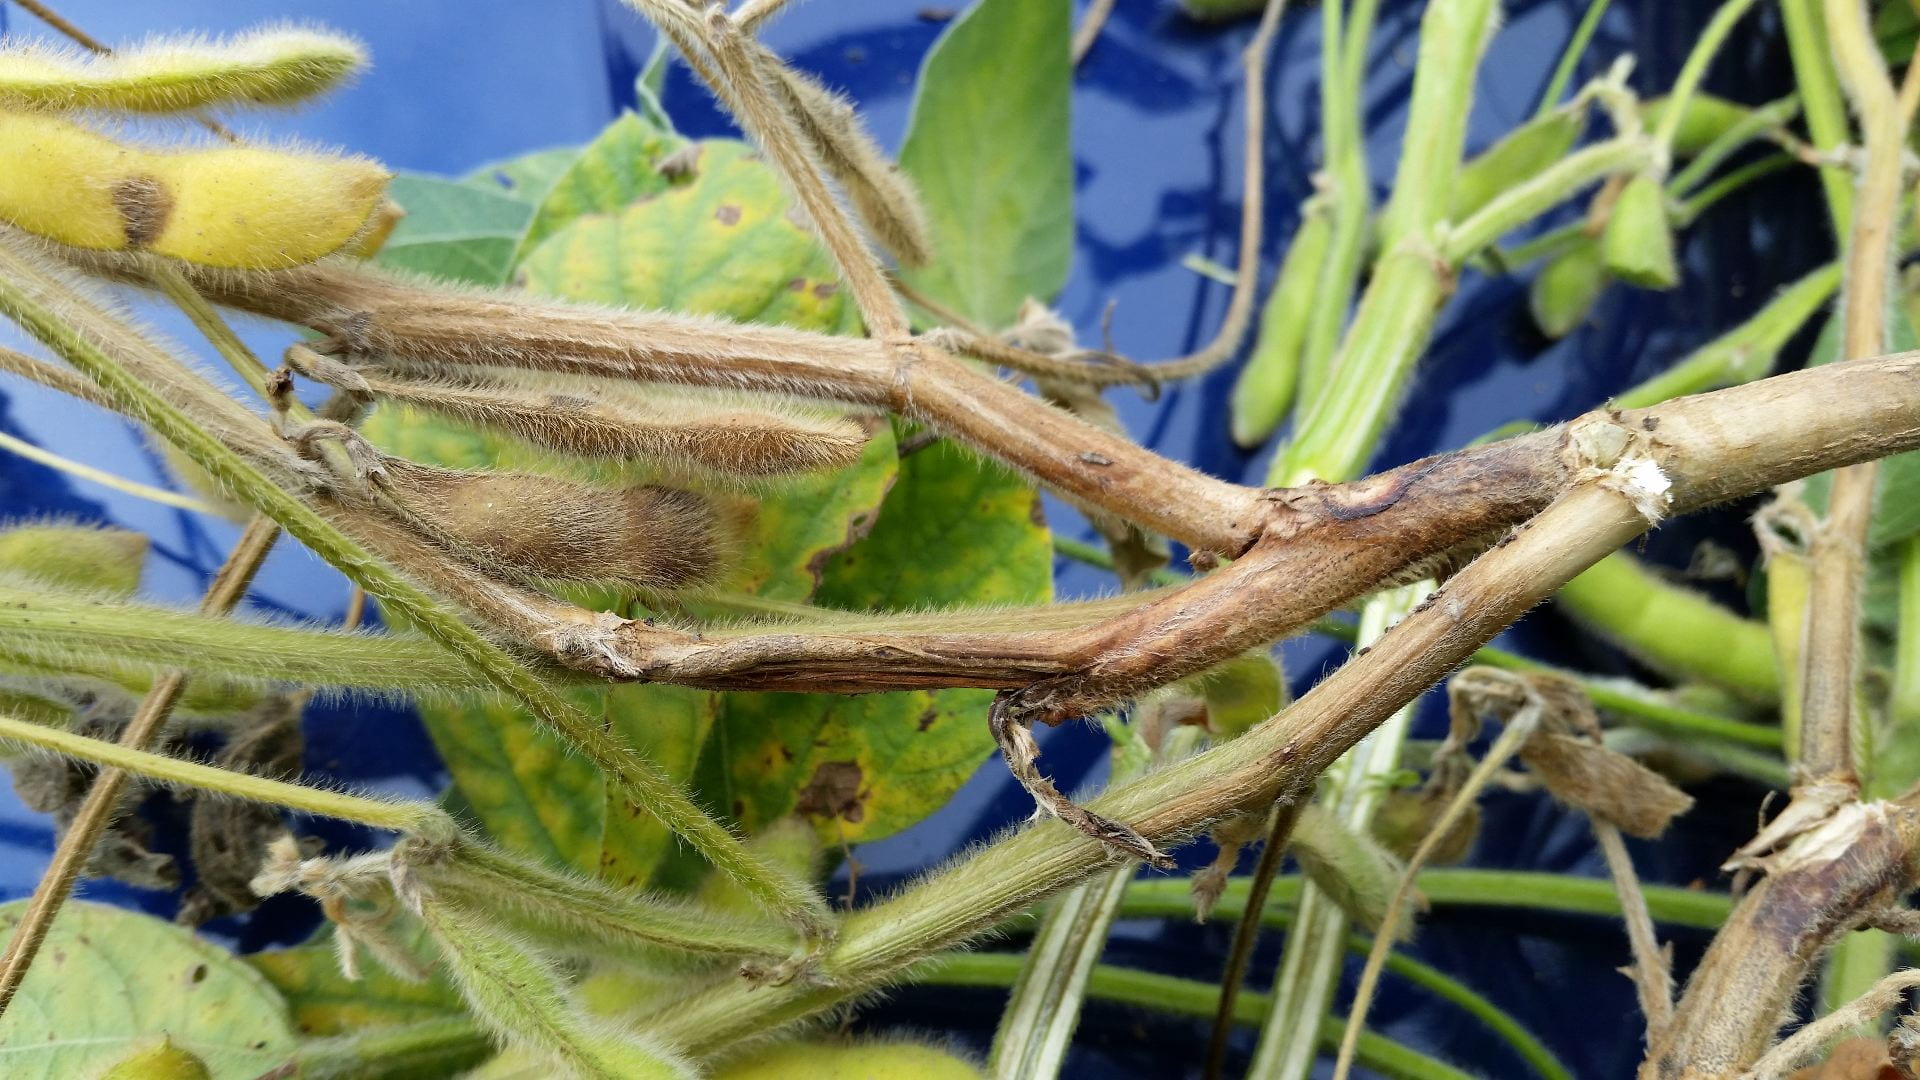 Photo shows a close up of soybean plant showing symptoms fo stem canker, a fungal disease.